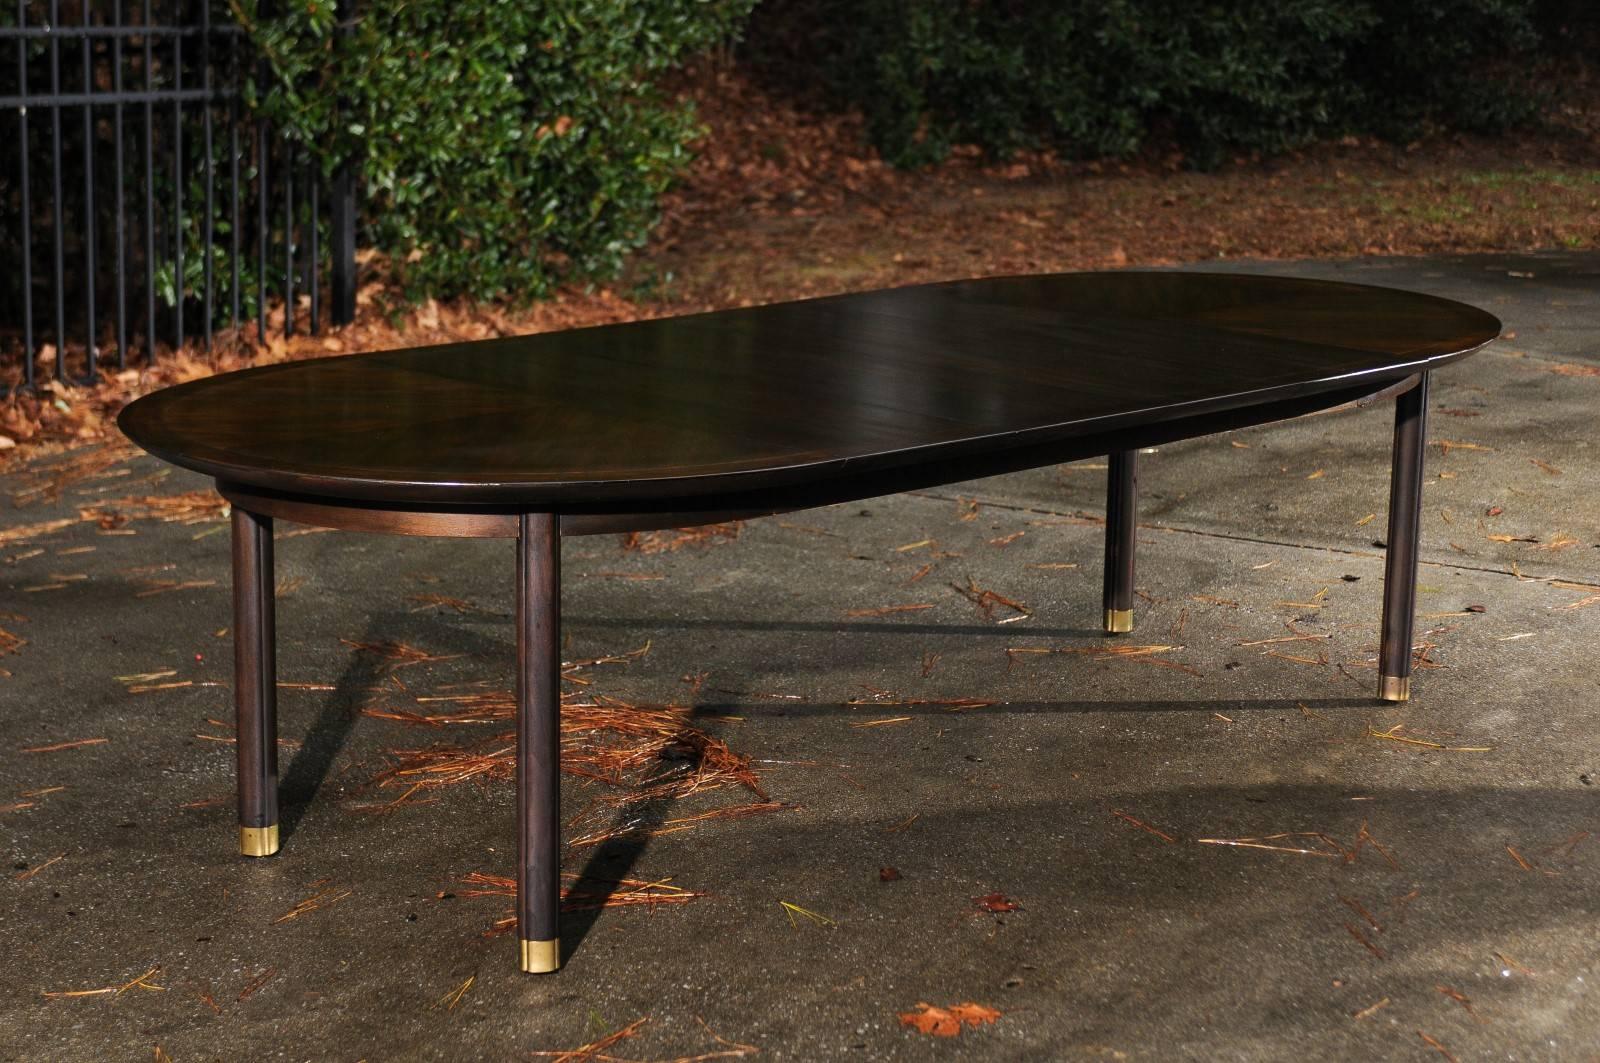 This magnificent dining table is shipped as professionally photographed and described in the listing narrative: Meticulously professionally restored and completely installation ready

A stunning example of an incredibly rare extension dining table